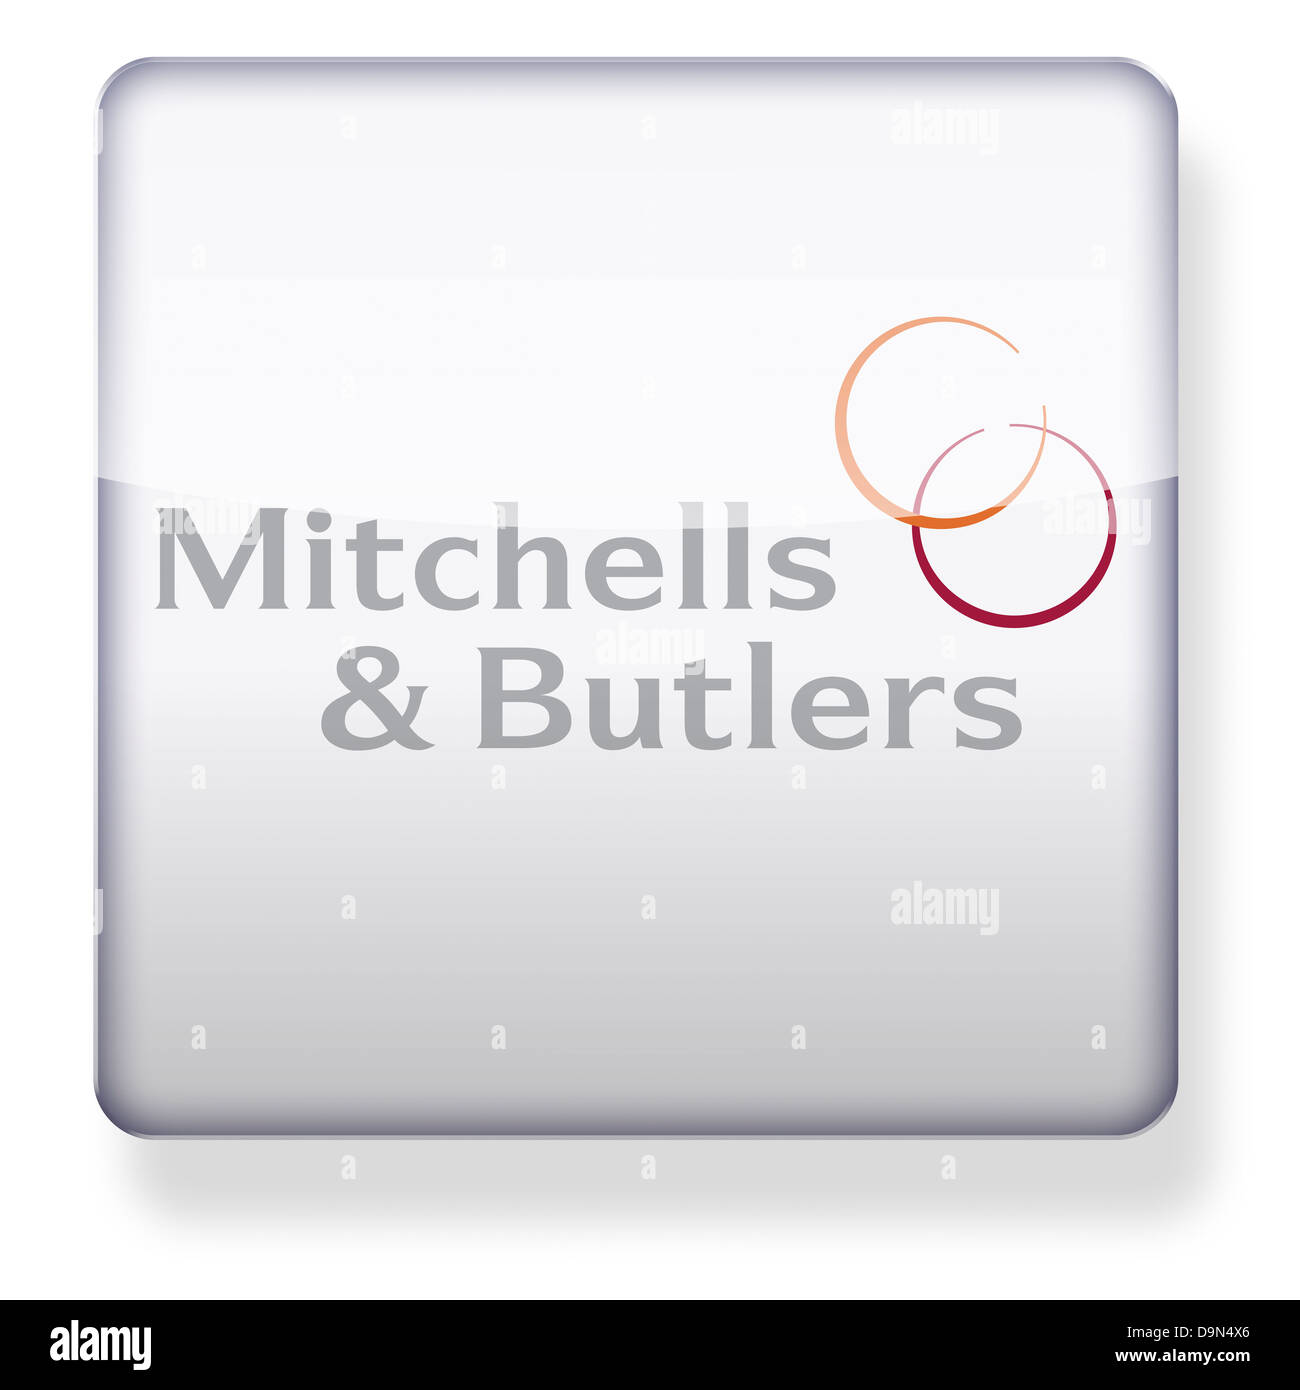 Mitchells and Butlers logo as an app icon. Clipping path included. Stock Photo